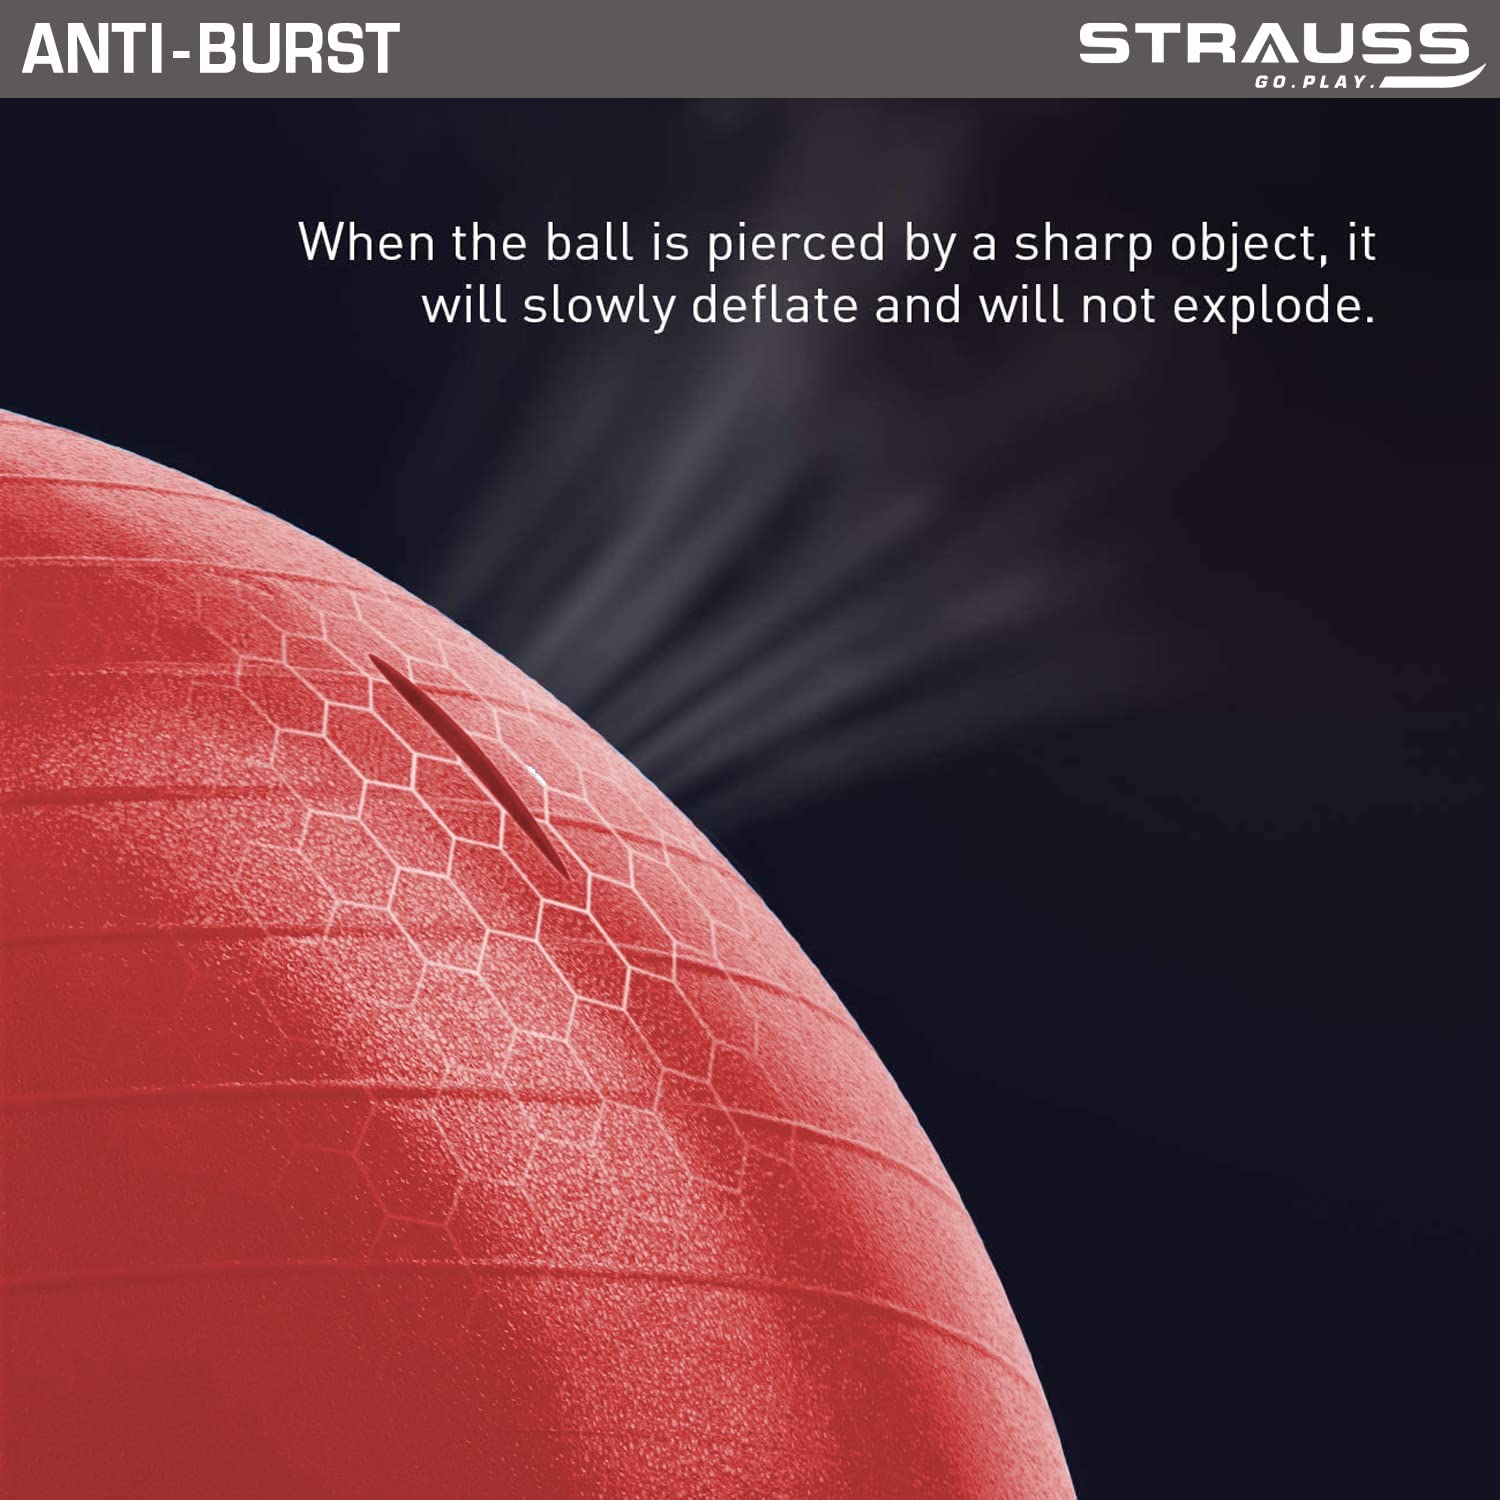 STRAUSS Anti Burst Gym Ball|Exercise Ball|Yoga Ball|Workout Ball, 85Cm (Red), Pack of 2